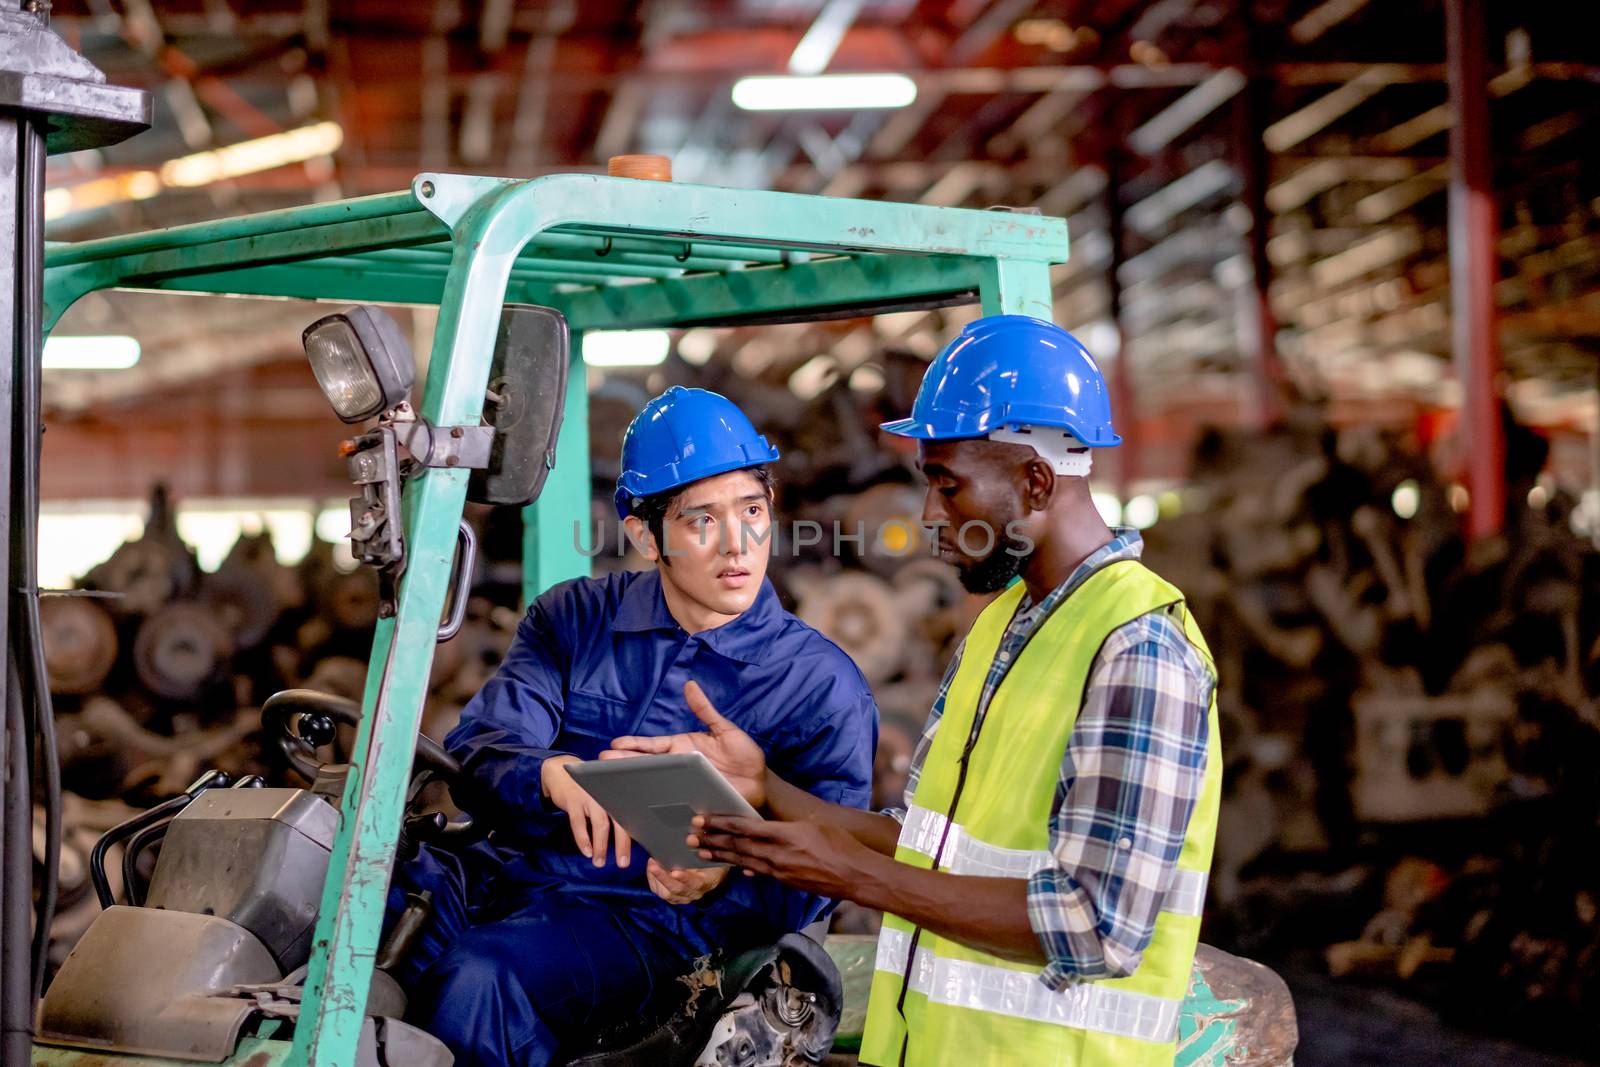 Asian technician or factory worker sit on forklift discuss about work using tablet with his co-worker African American man in automotive workplace area during day time for good industrial teamwork.